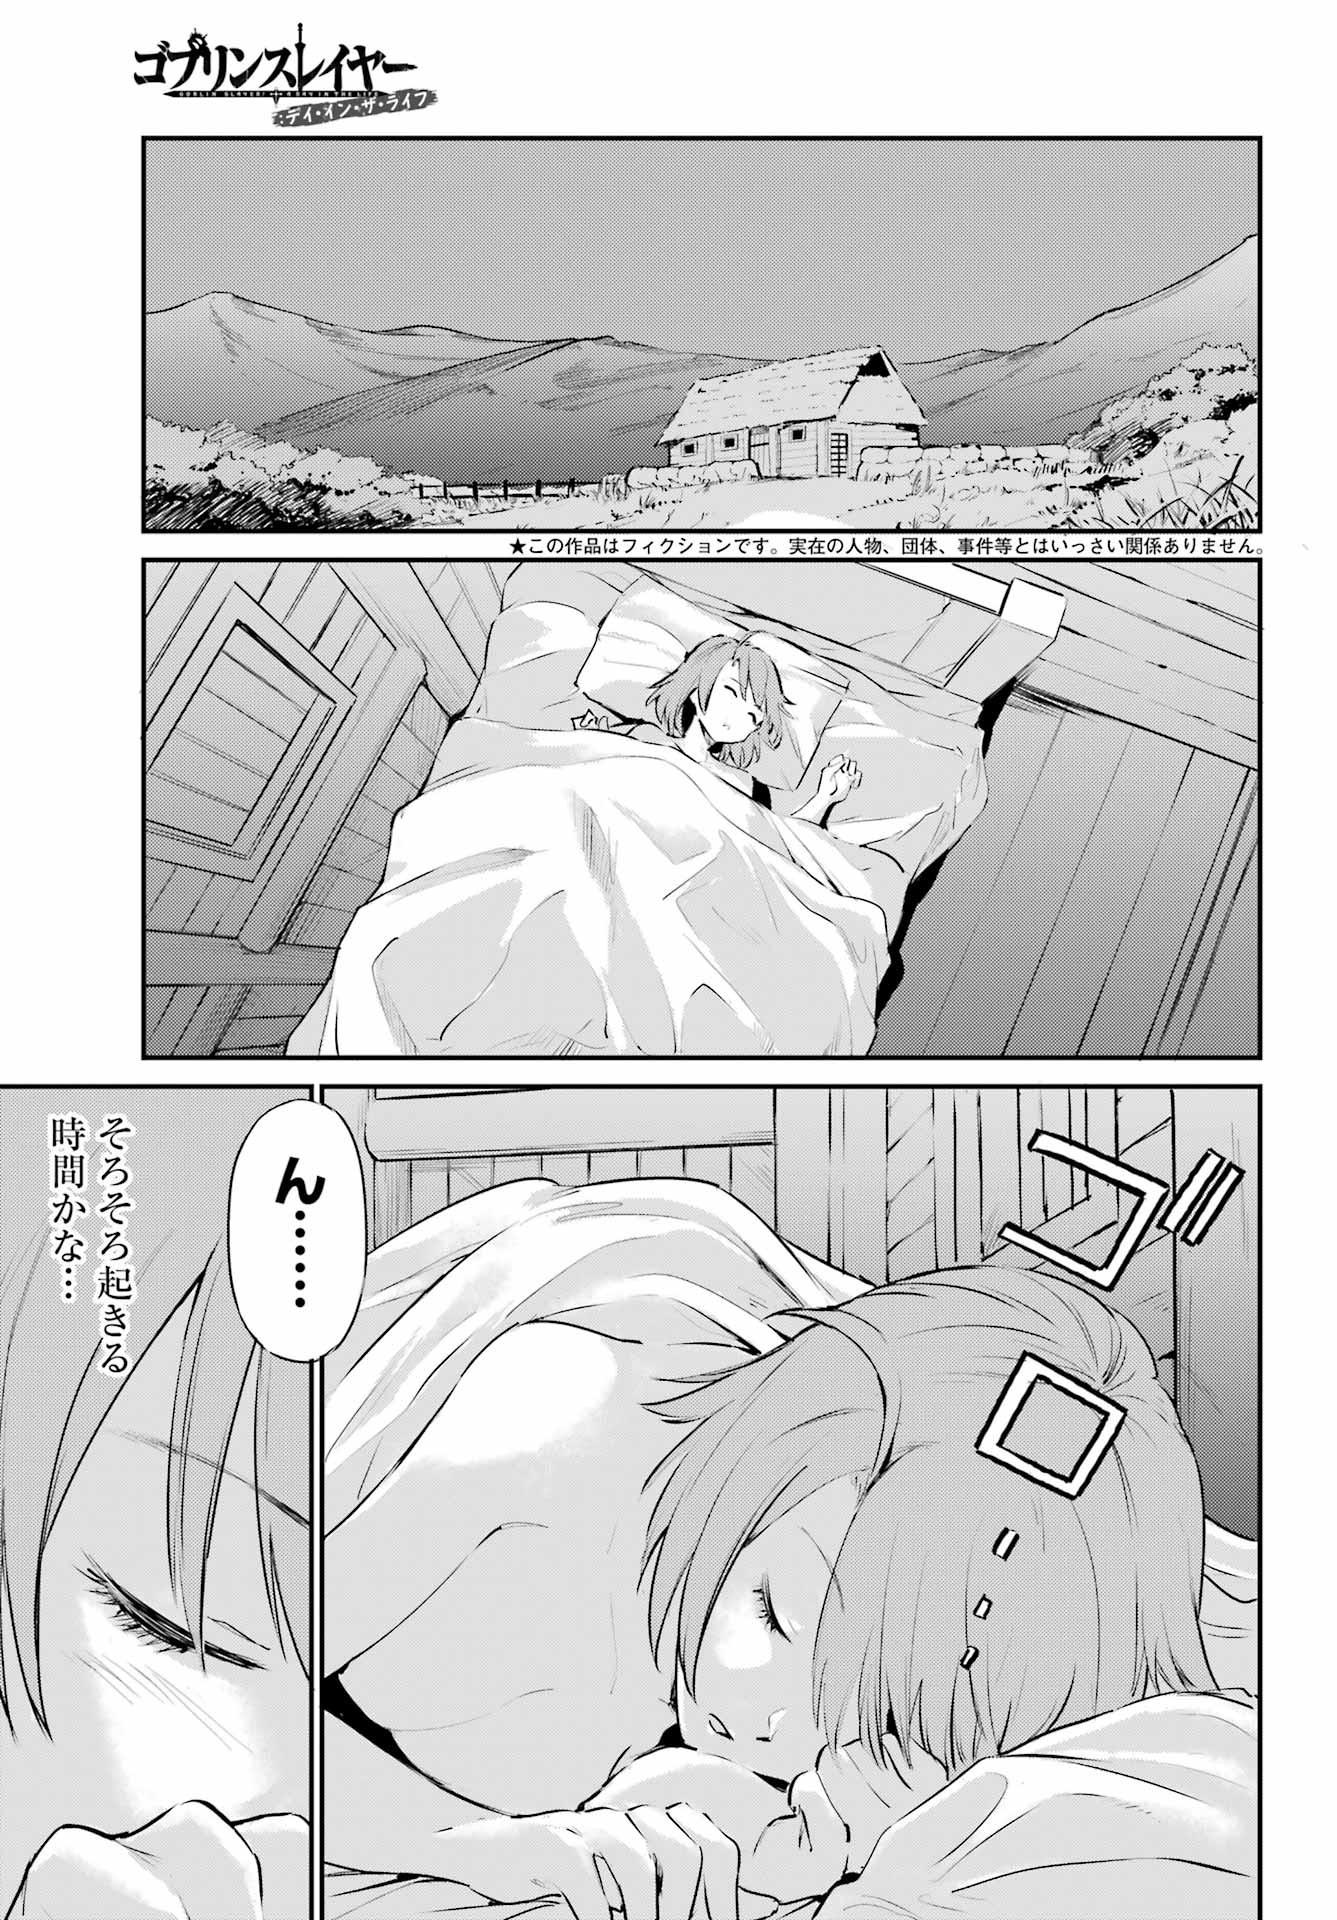 Goblin Slayer: Day in the Life - Chapter 05 - Page 3